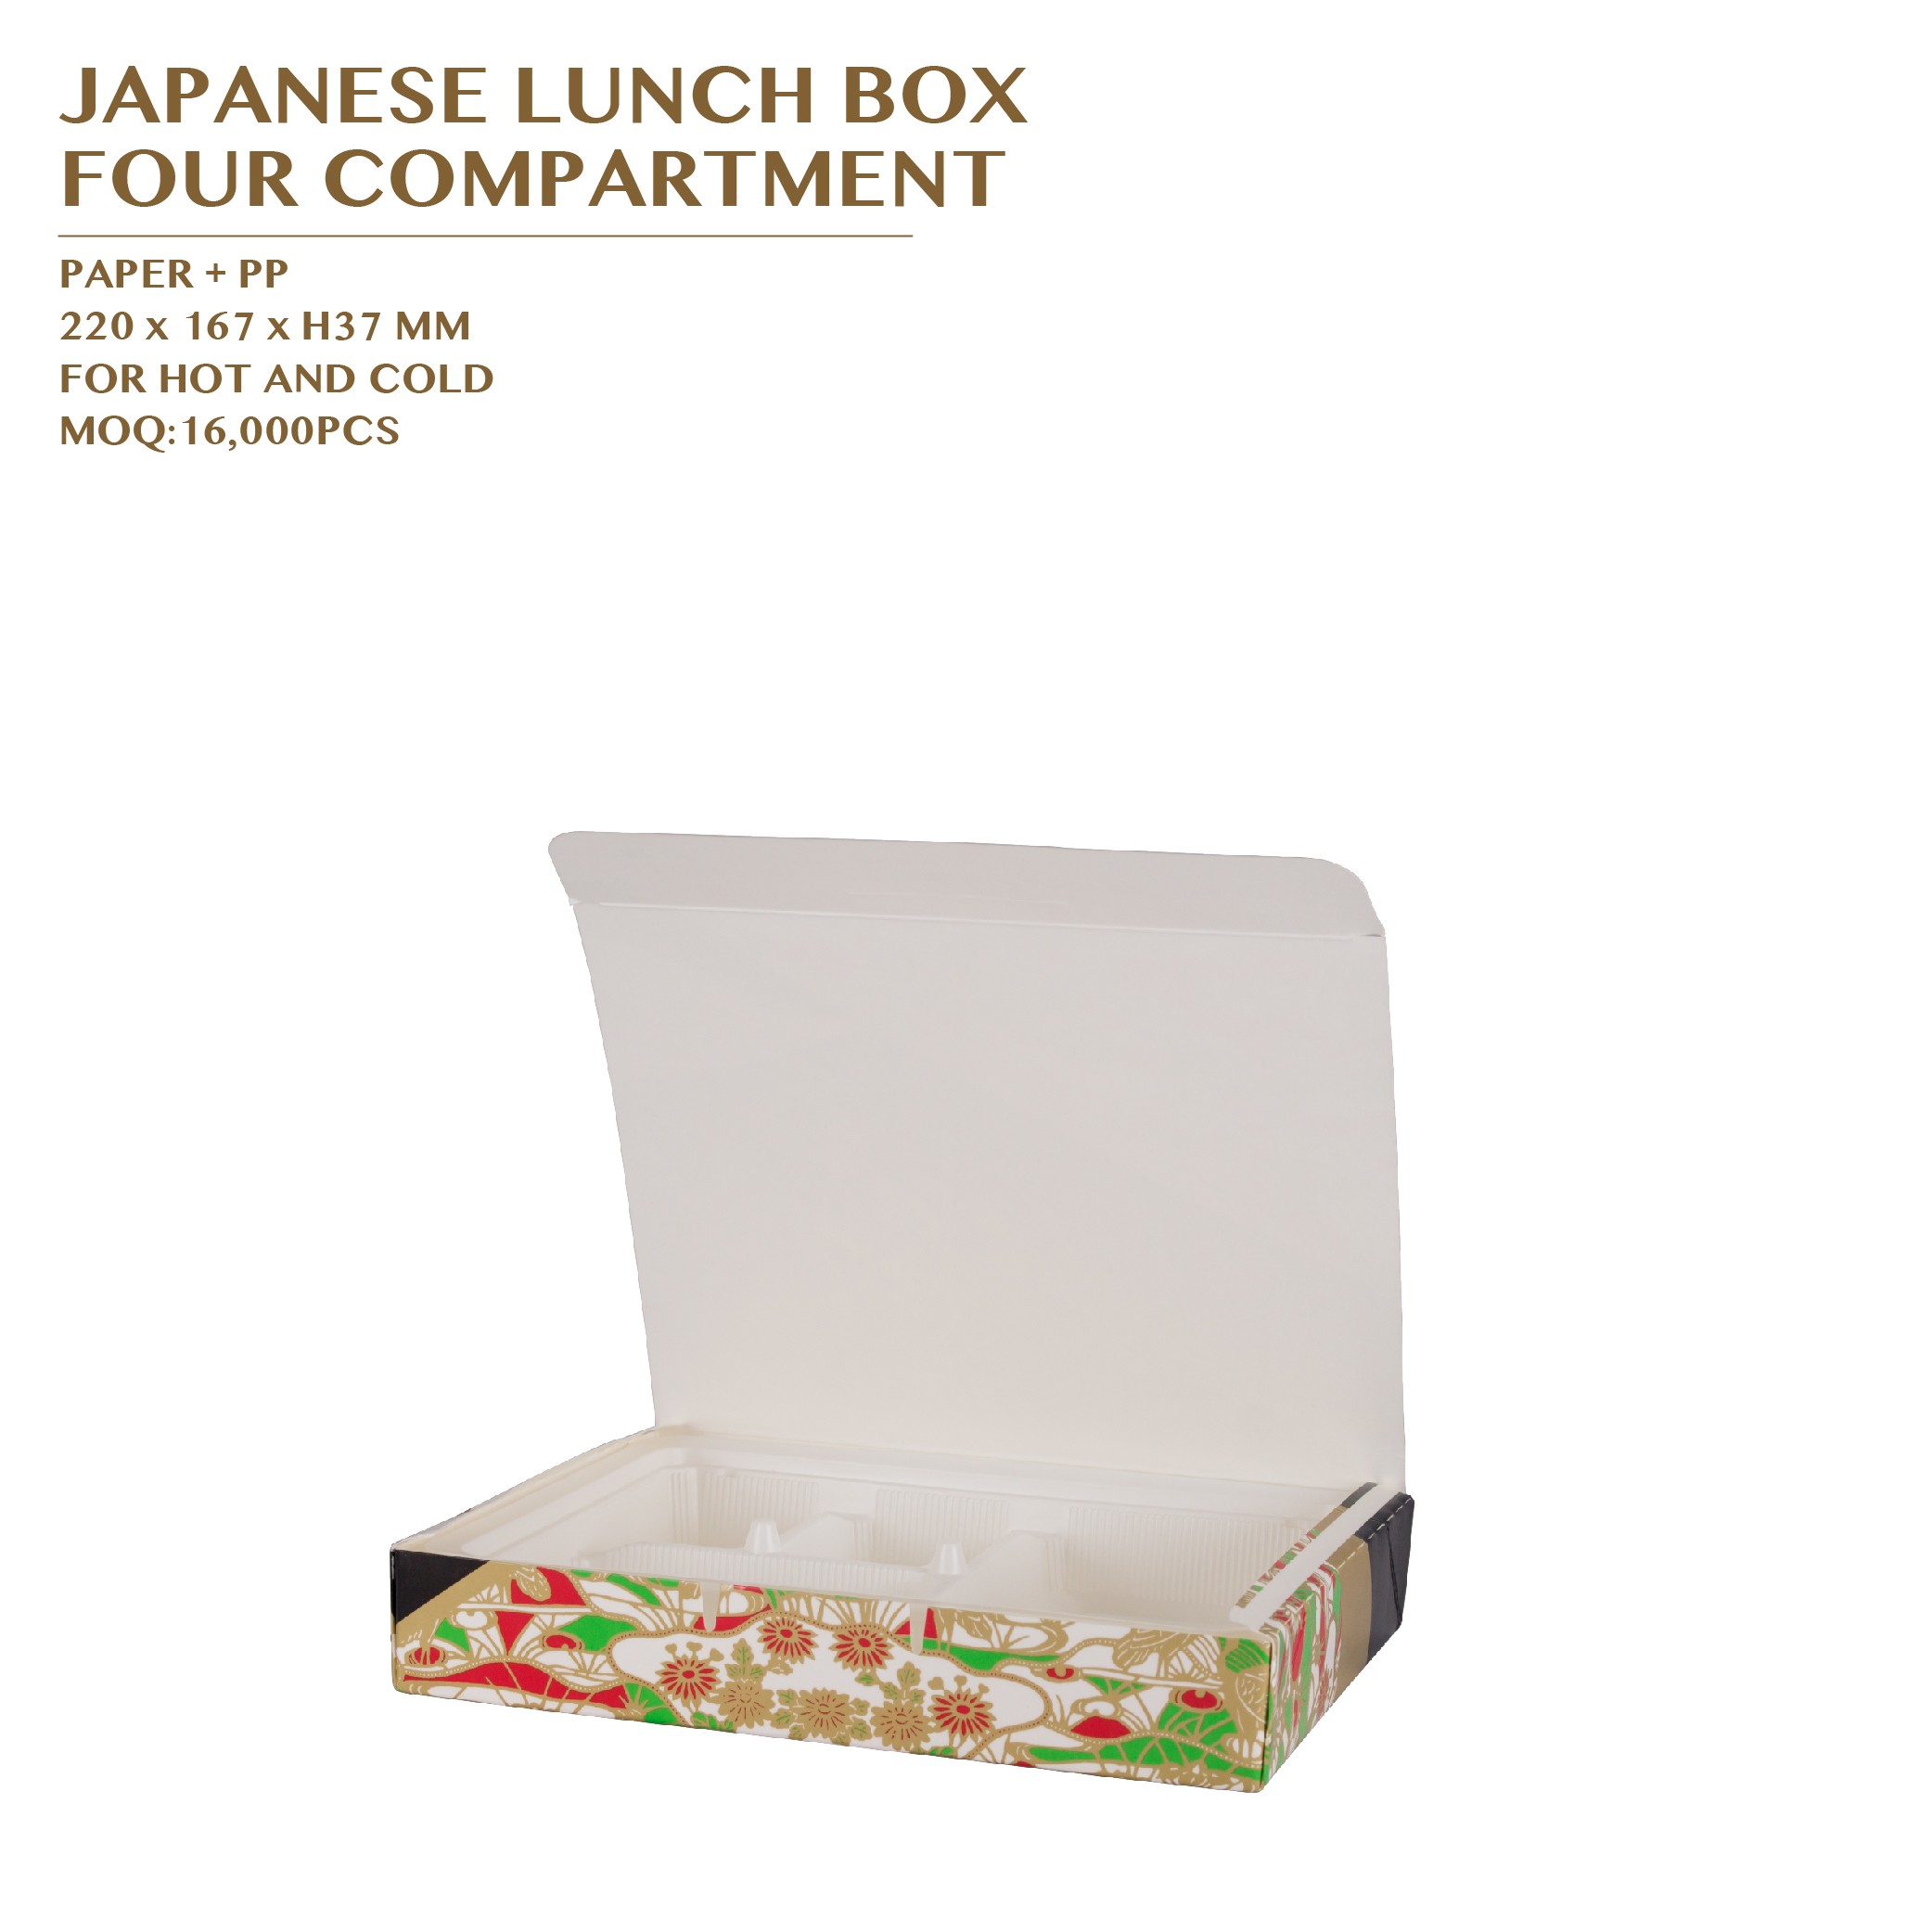 PRE-ORDER JAPANESE LUNCH BOX  FOUR COMPARTMENT 400SET/CTN